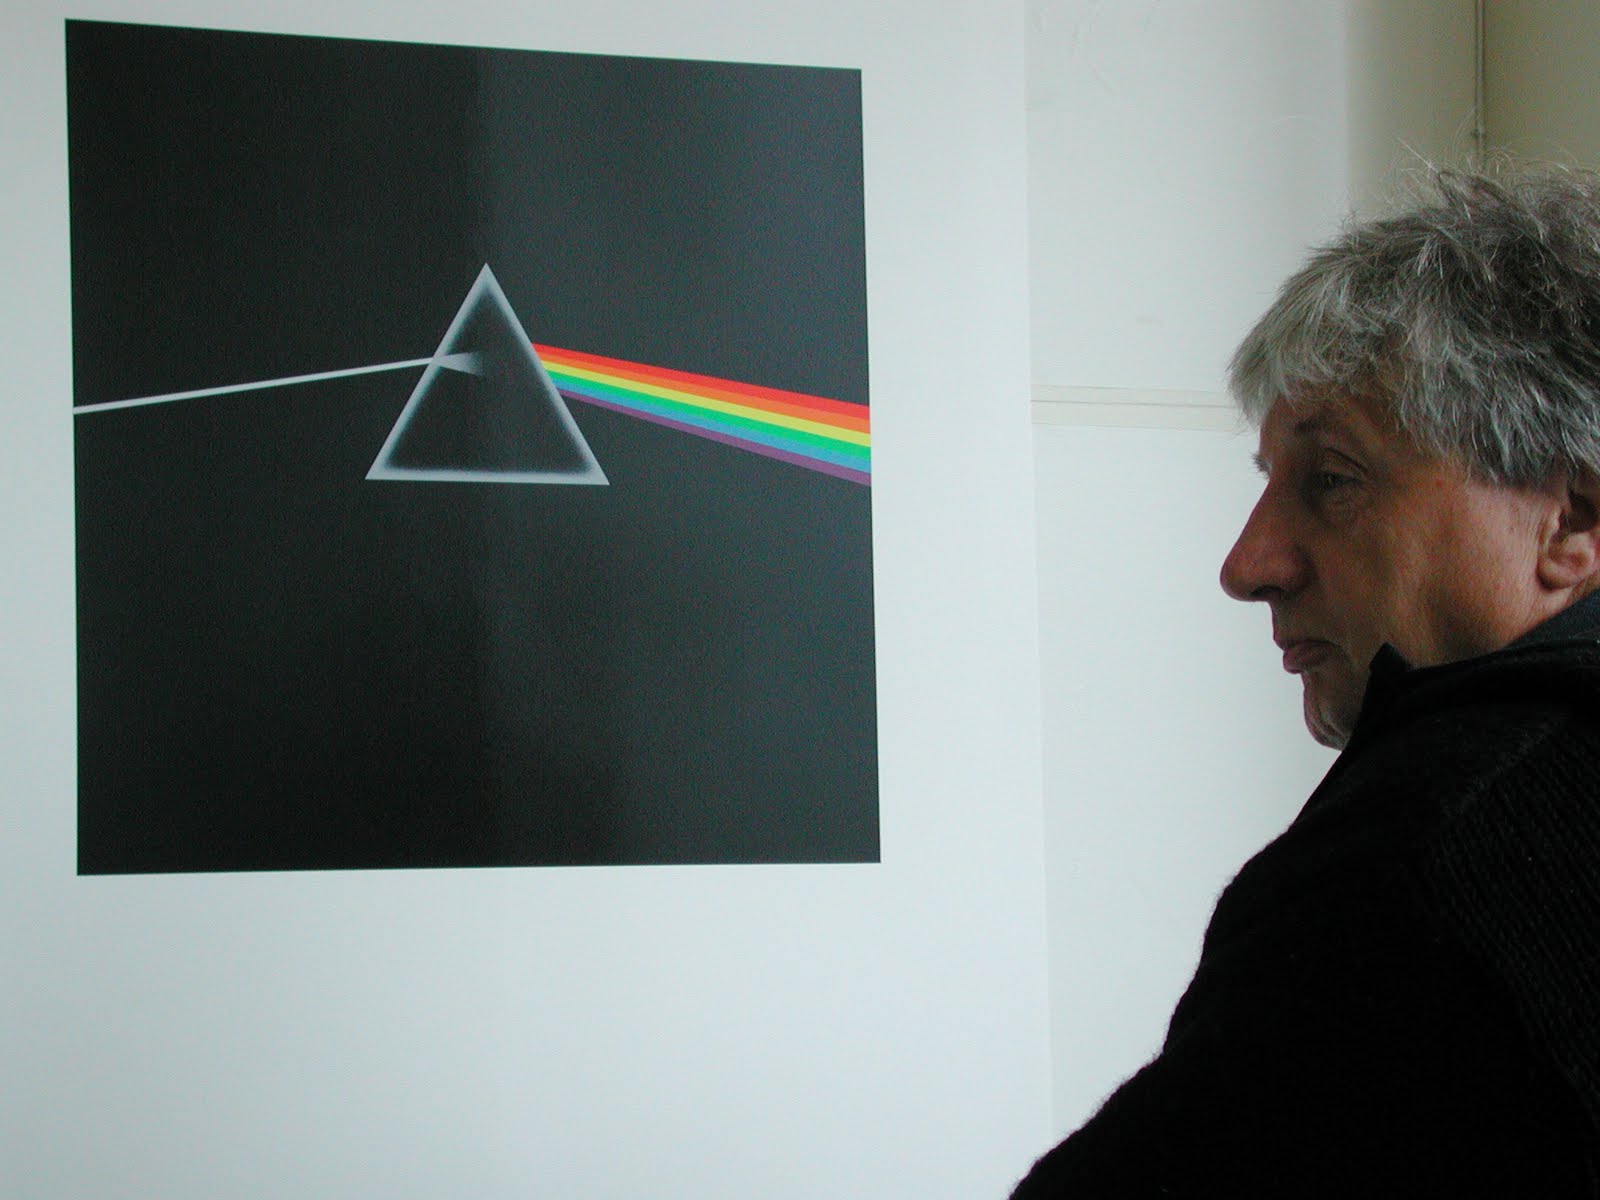 STORN THORGERSON: R.I.P